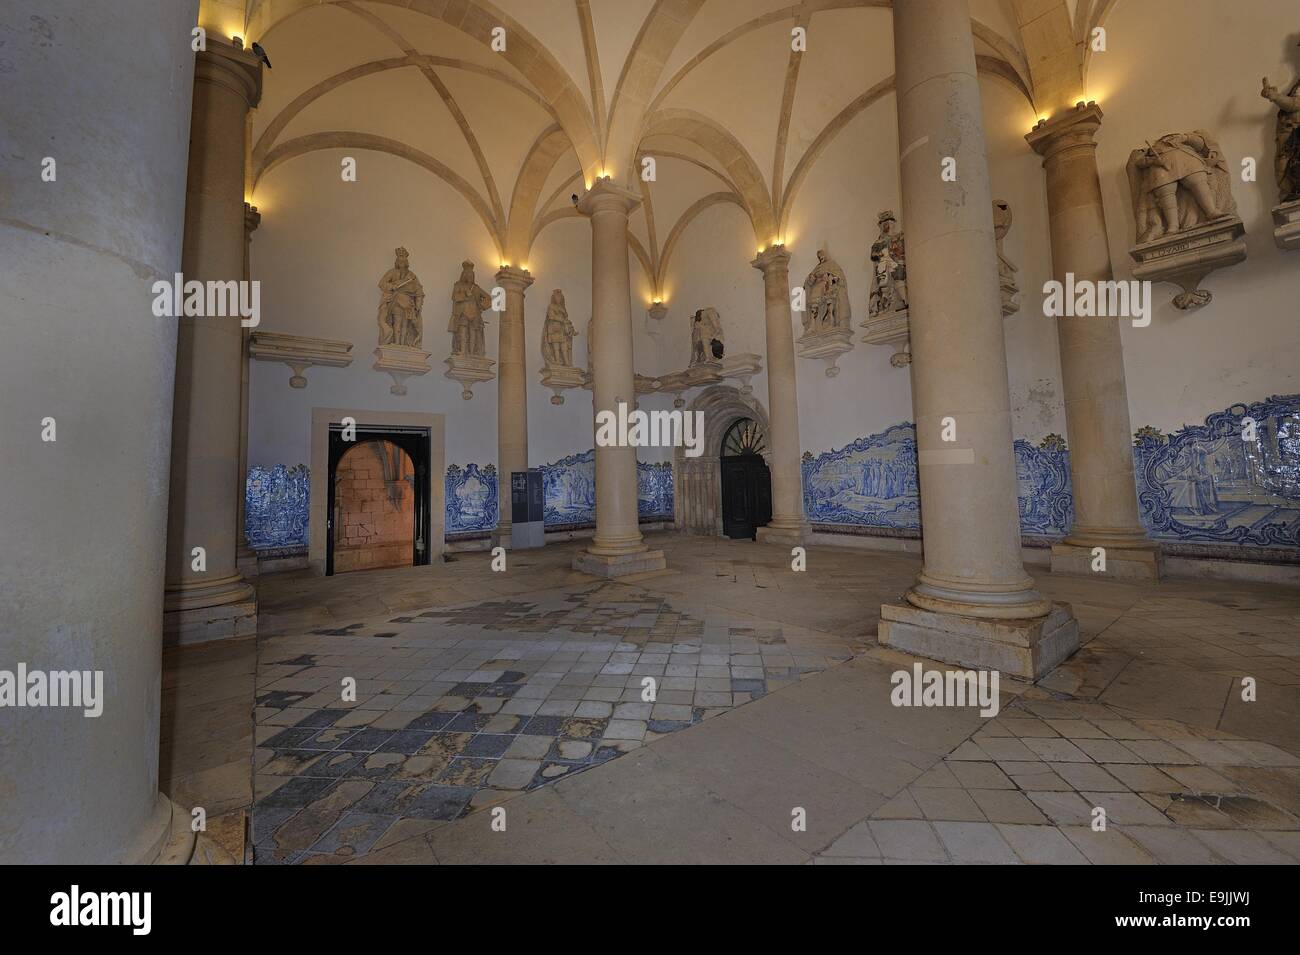 Azulejos and statues in the Room of the Kings, Alcobaça Monastery, Alcobaça, Leiria District, Portugal Stock Photo